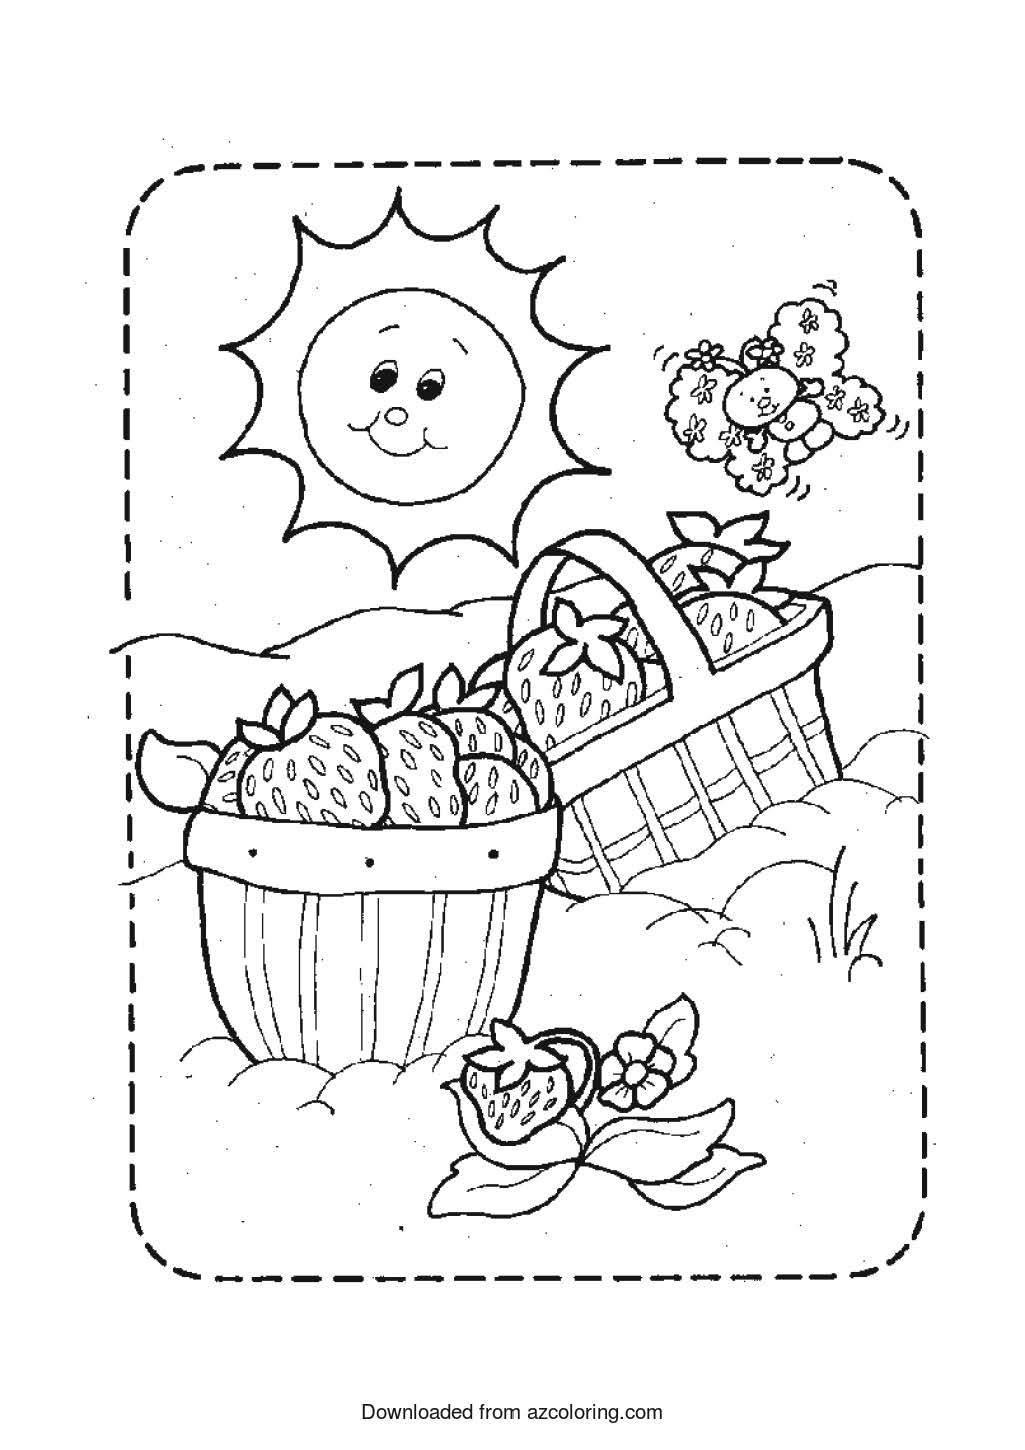 Strawberry coloring page image